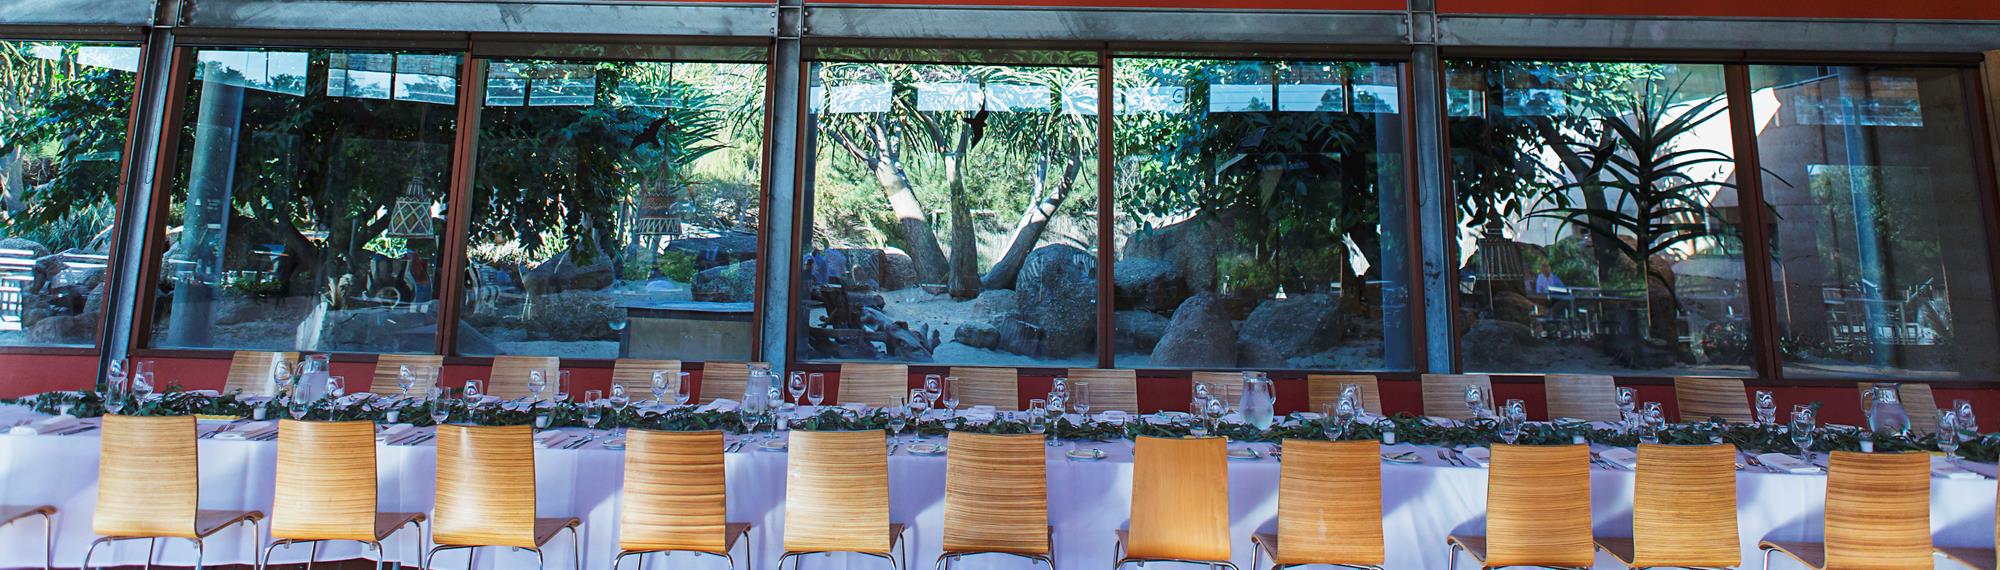 Meerkat Bistro private function area with a long formal set table positioned in front of windows over looking the meerkat enclosure.